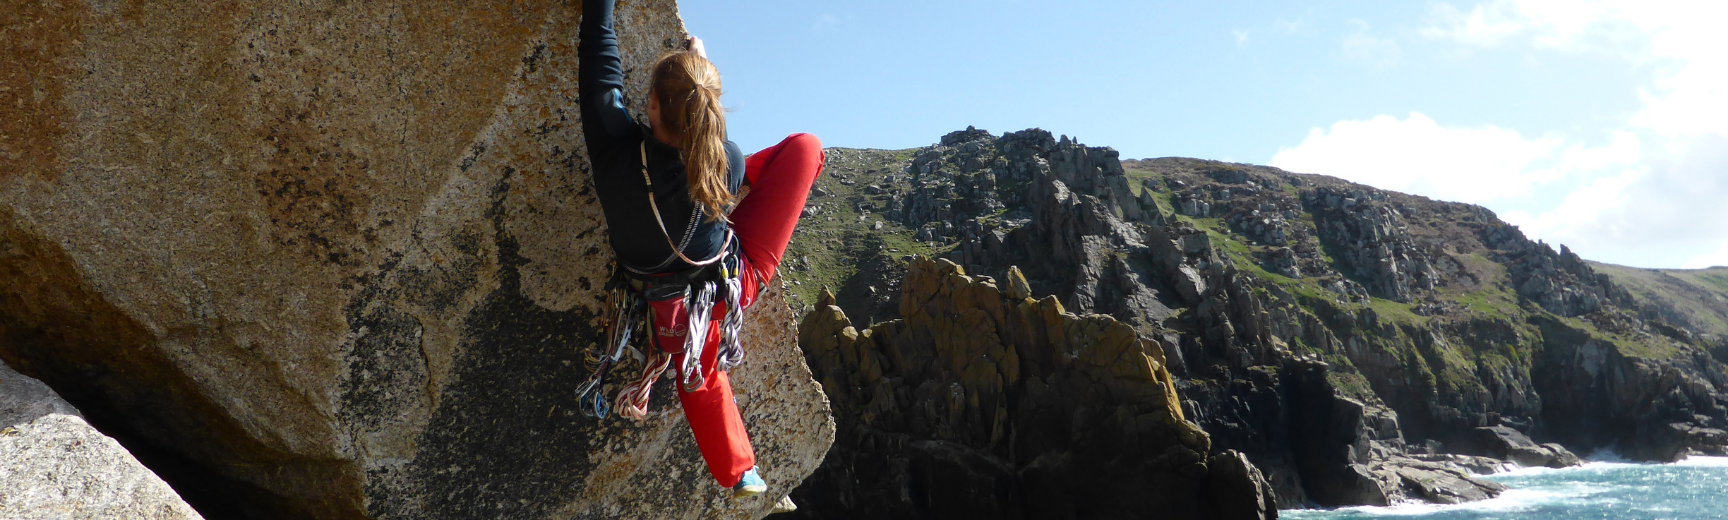 A climber climbing up an angled rock, with a view of the coastline behind her